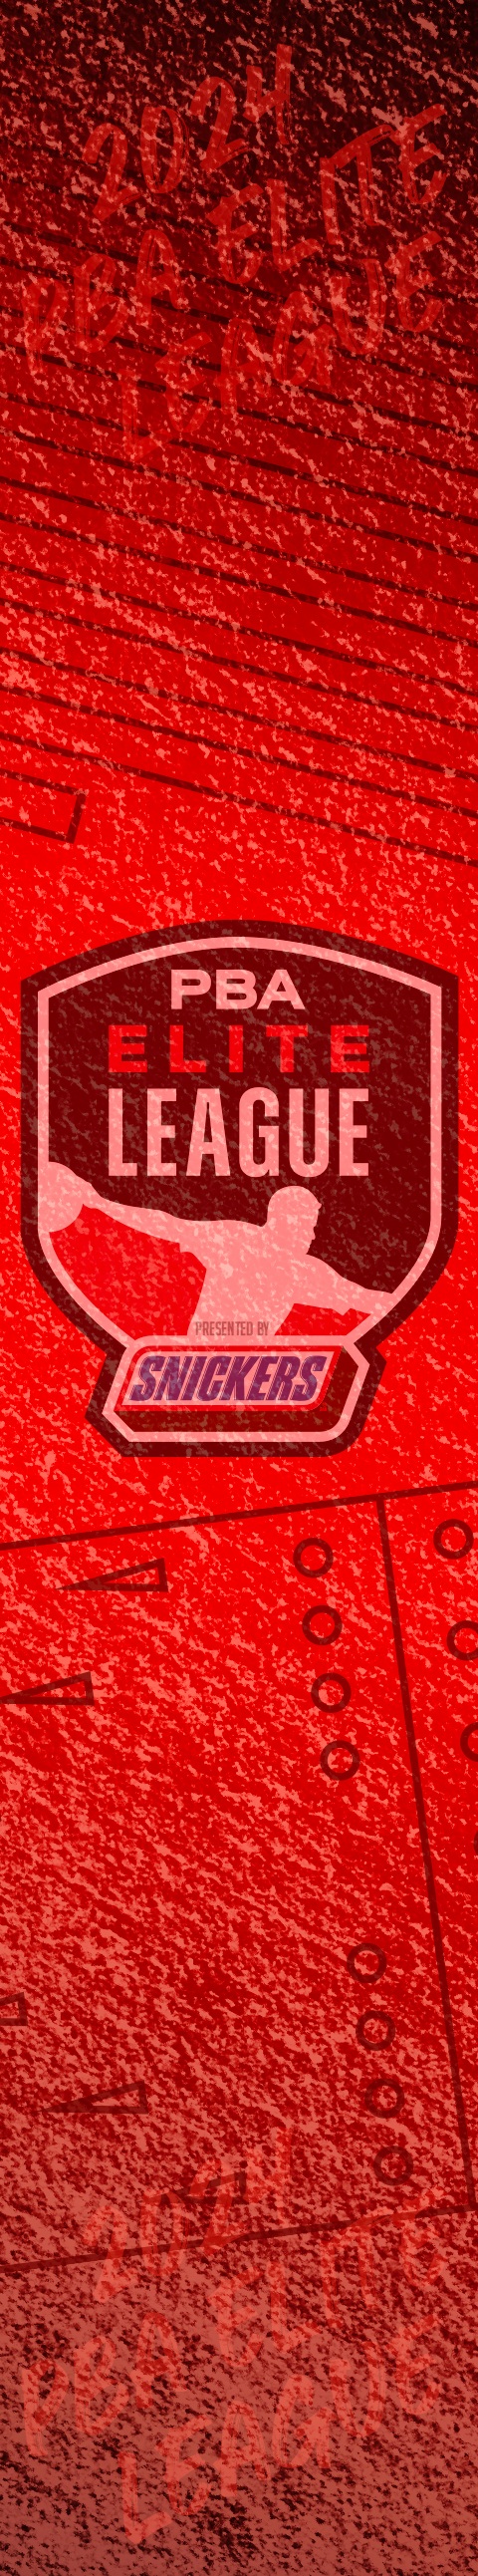 PBA Elite League Presented by Snickers